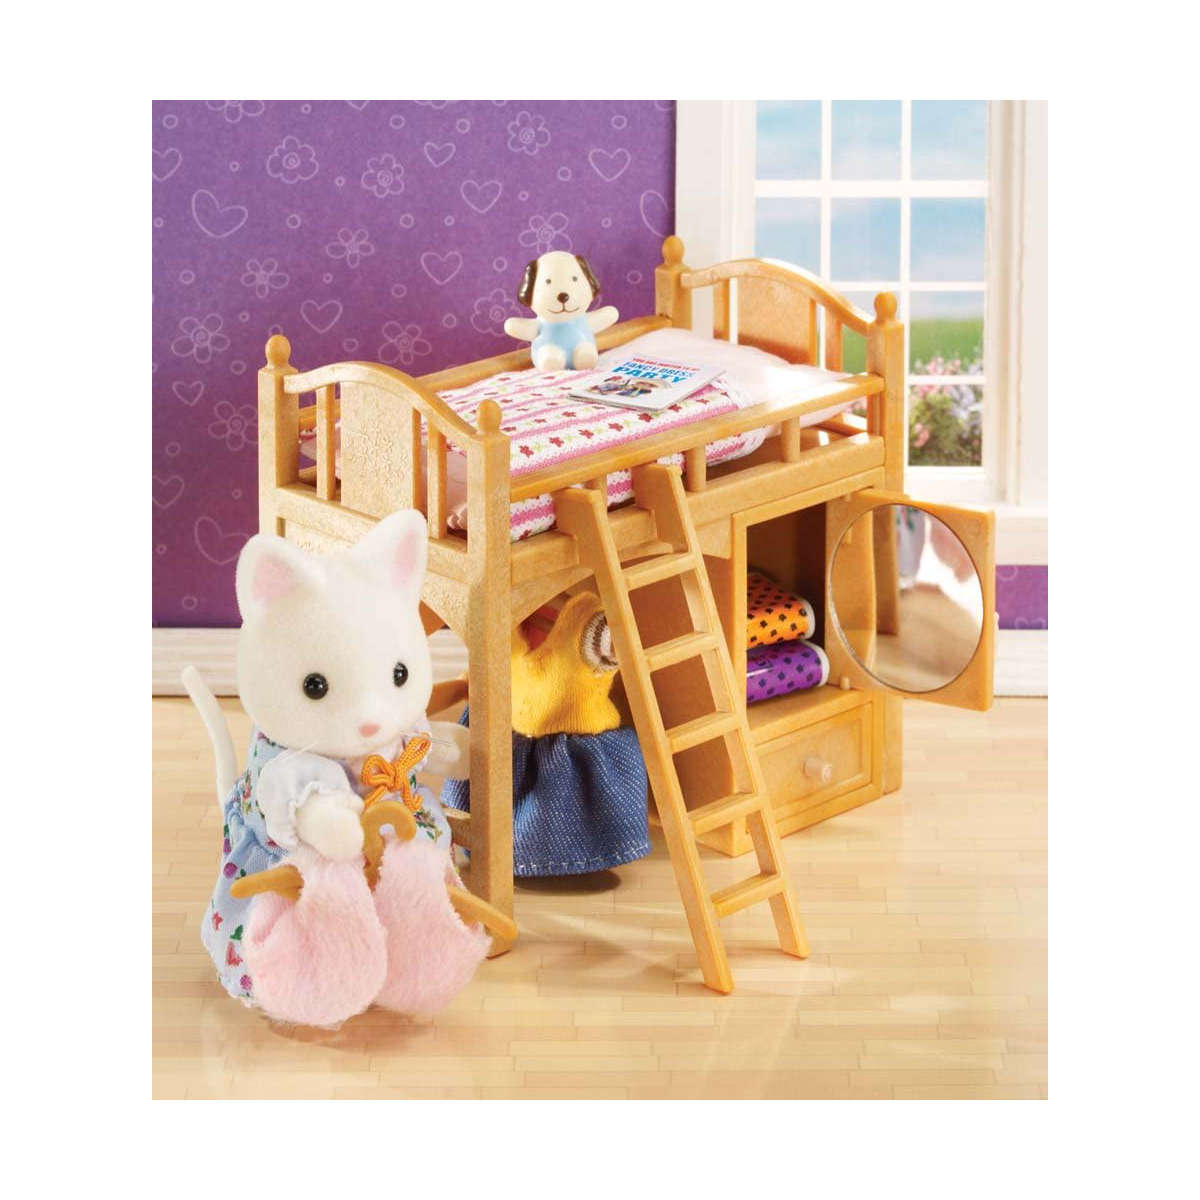 Calico Critters Loft Bed